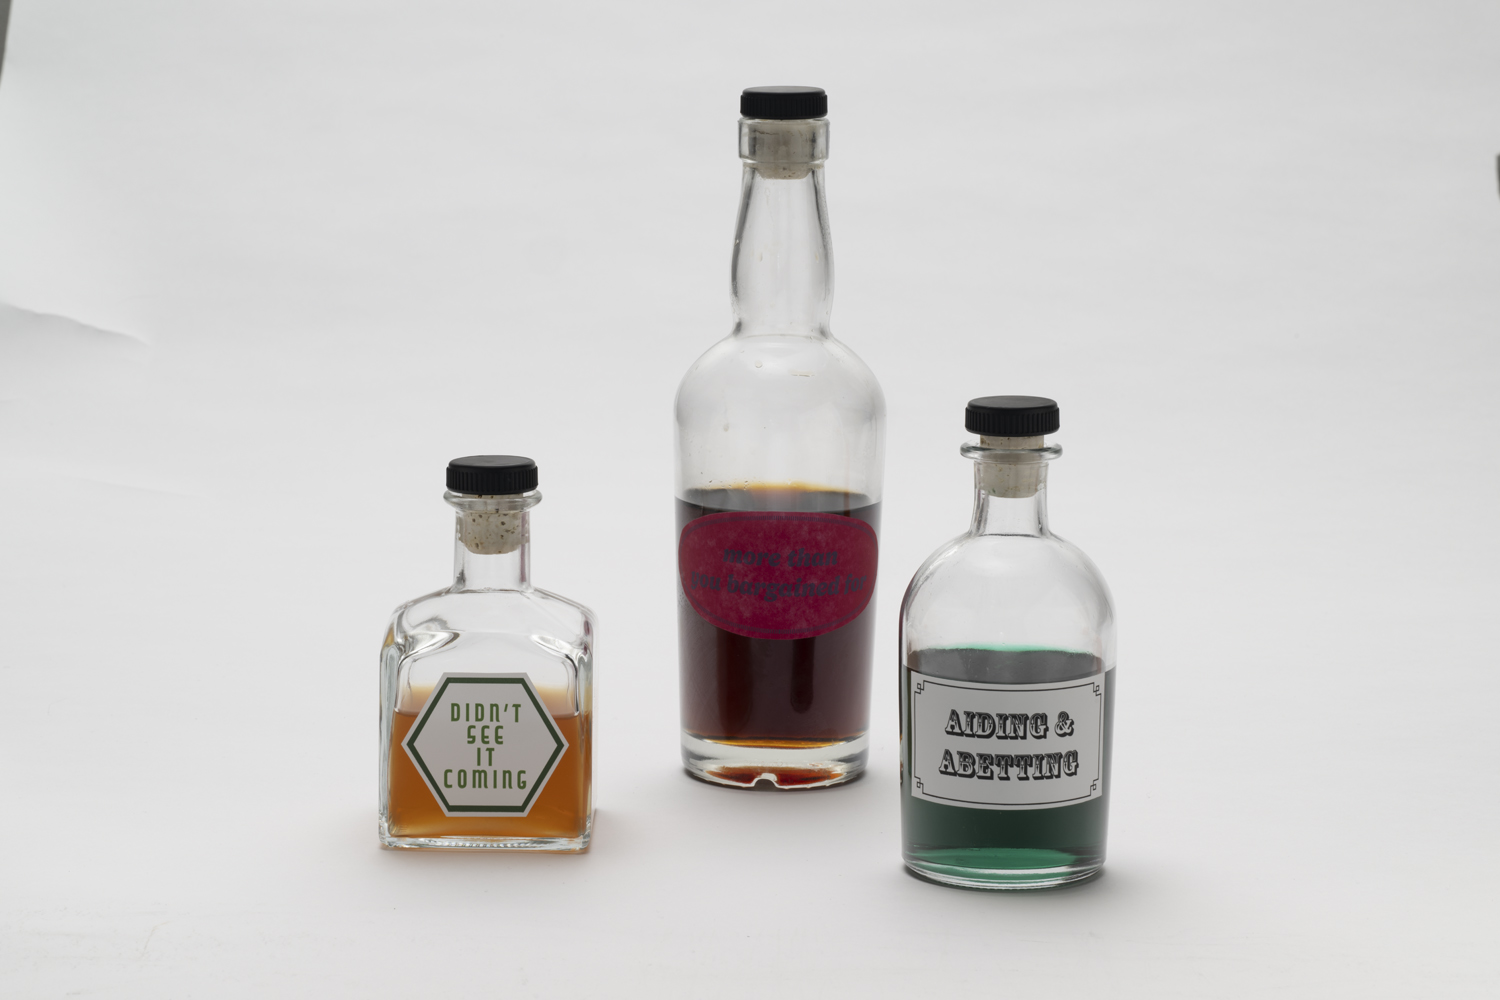 A trio of bottles, each a different size and shape, are partially filled with liquids: one amber, one deep red, one mint green. The bottles are each labeled according the scent of the liquid they contain: "Didn't See it Coming," "More than you Bargained For," and "Aiding & Abetting"